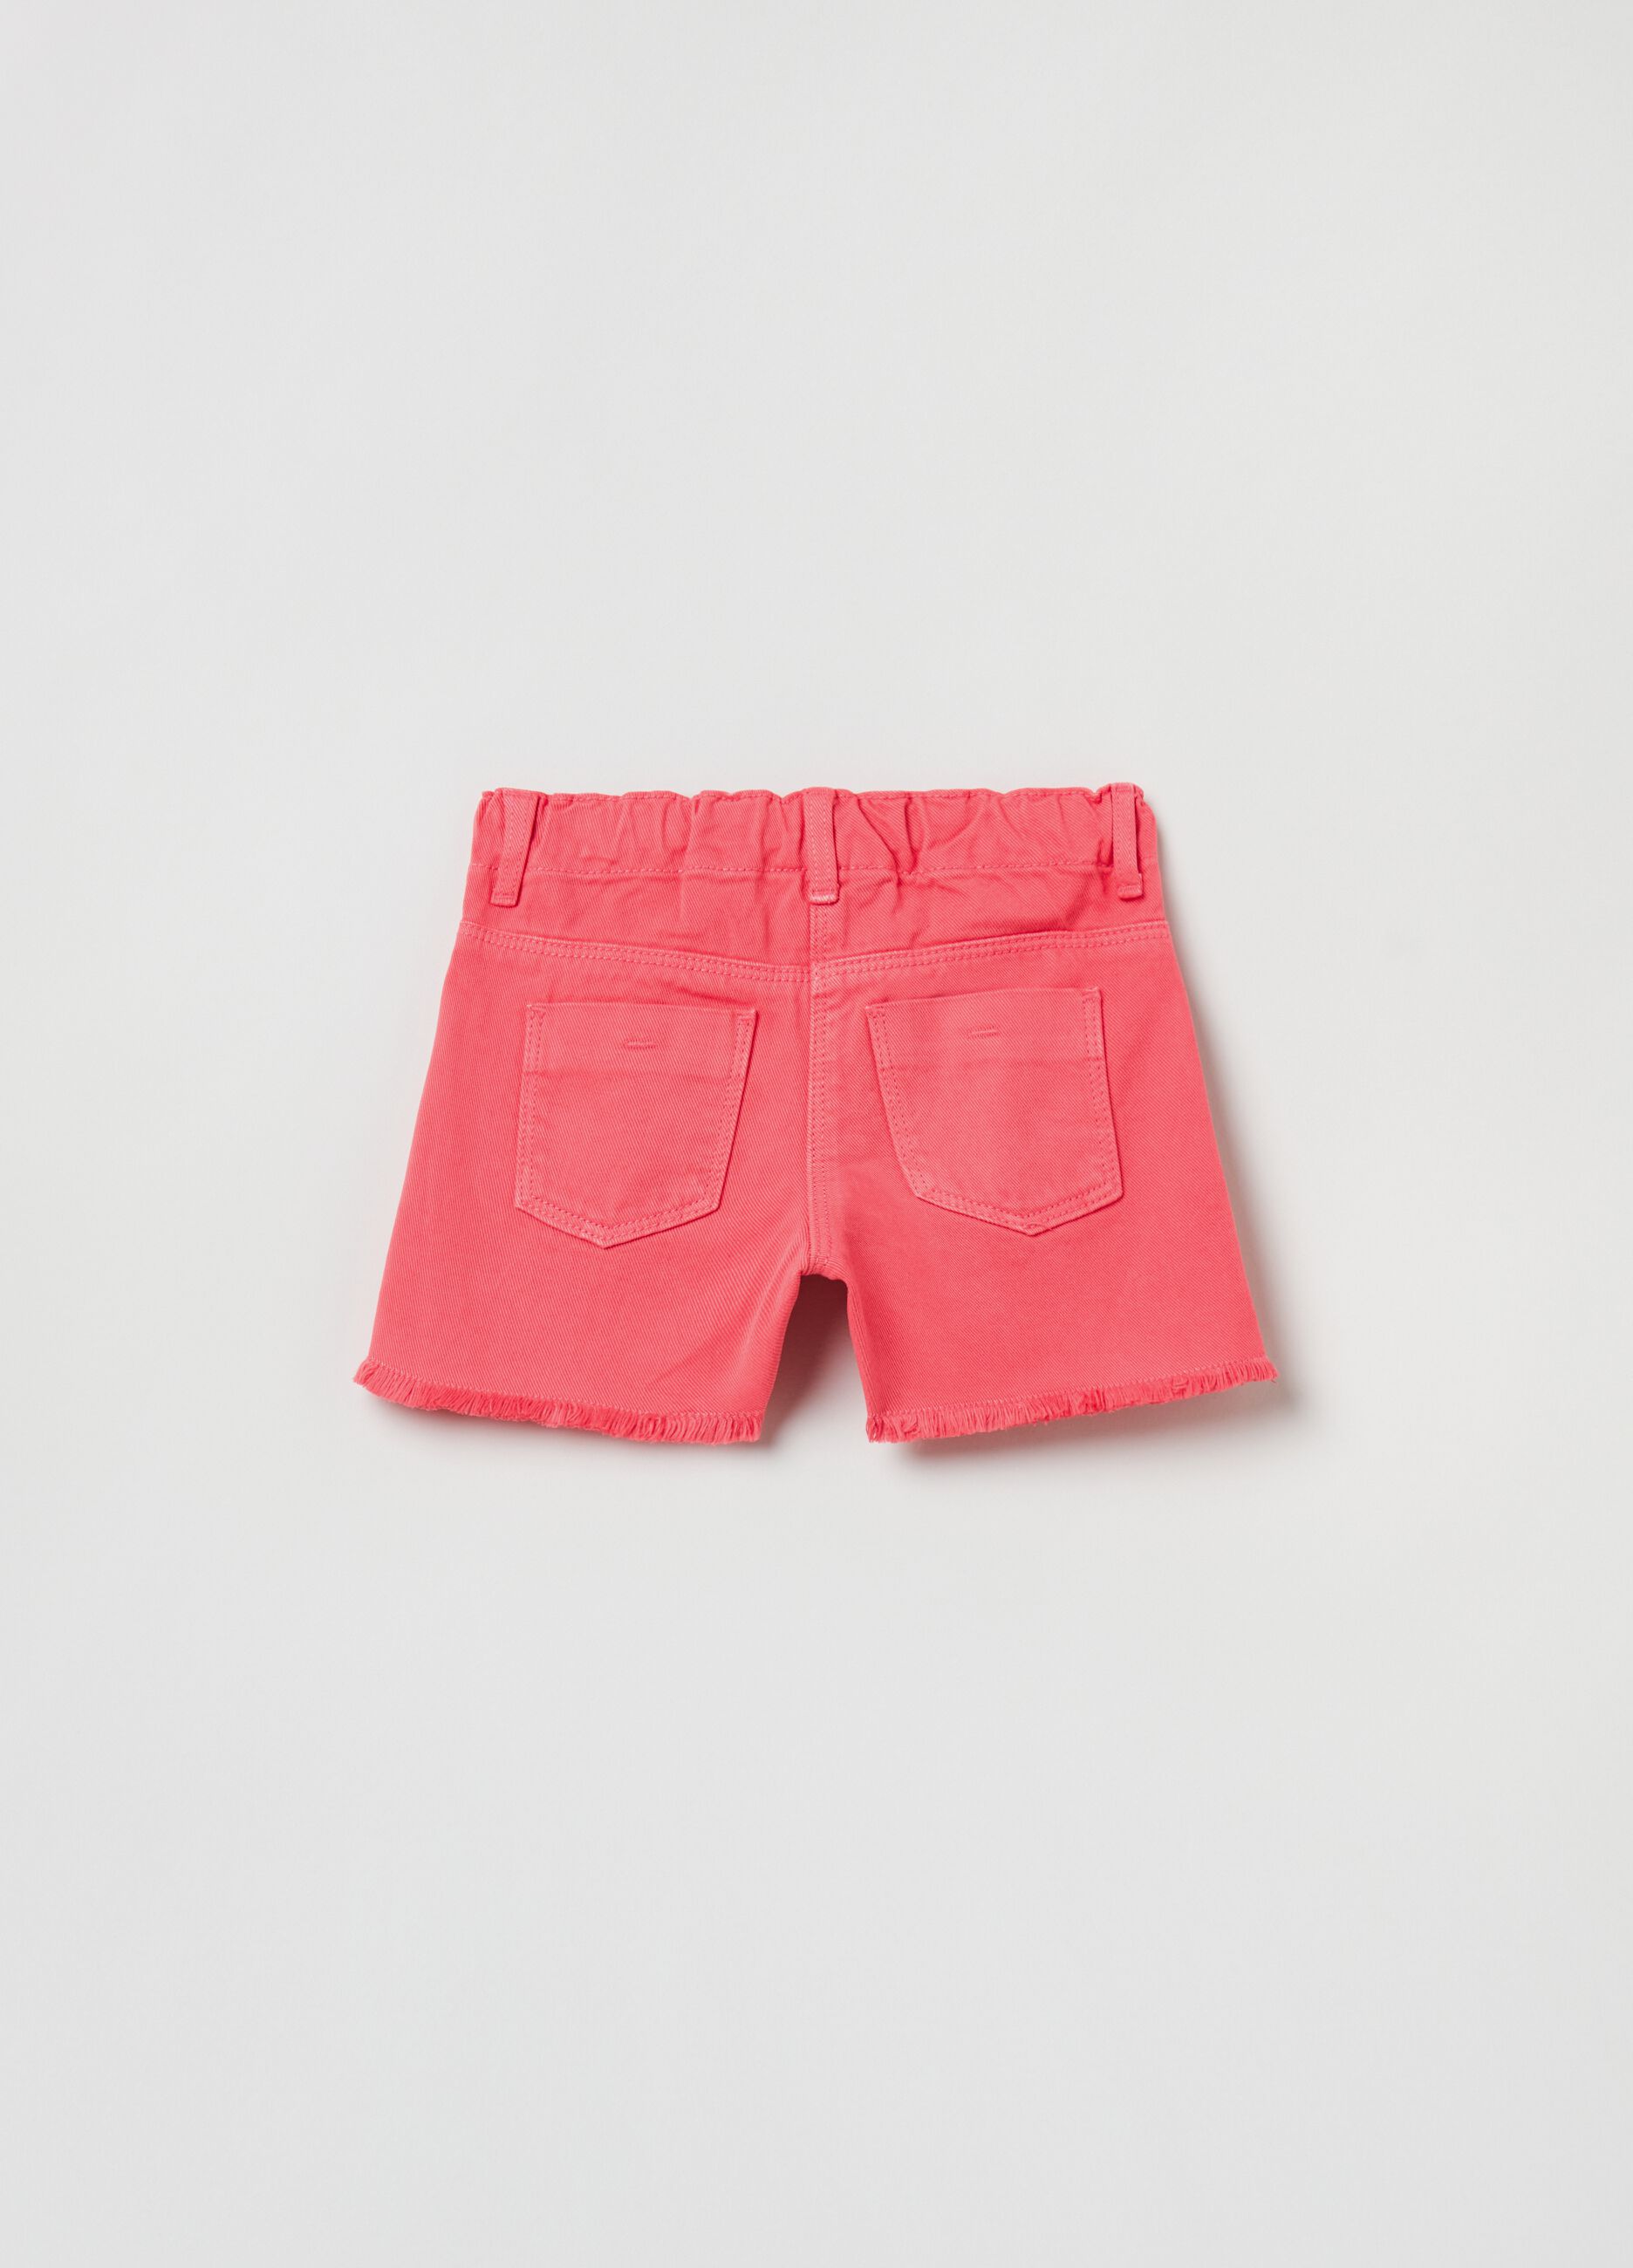 Shorts in cotton and Lyocell denim